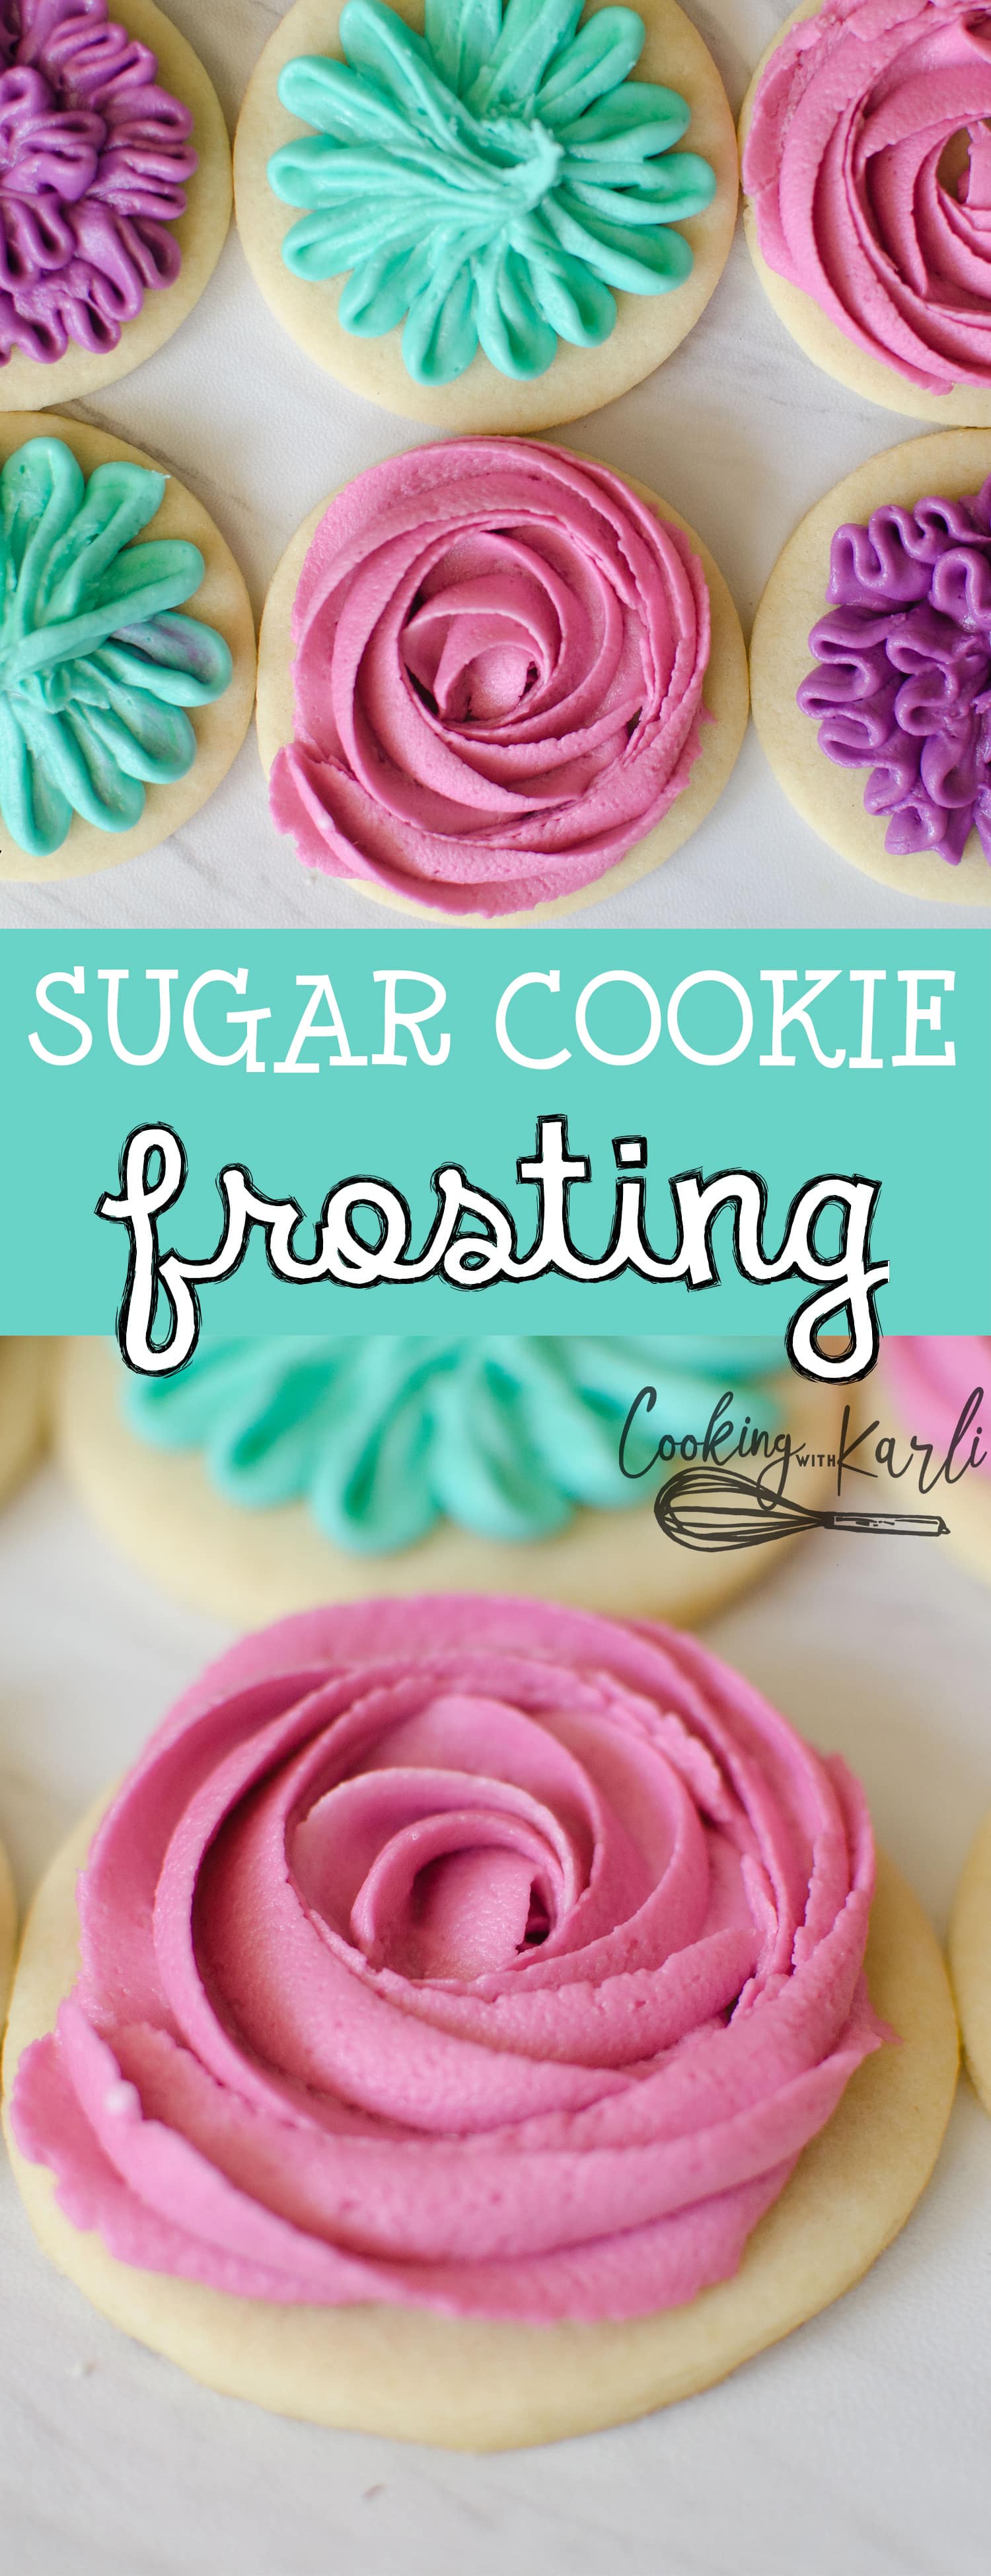 Sugar Cookie Frosting is a crusting vanilla buttercream that pipes and holds shape but tastes amazing at the same time! -Cooking with Karli- #recipe #frosting #icing #buttercream #sugarcookie